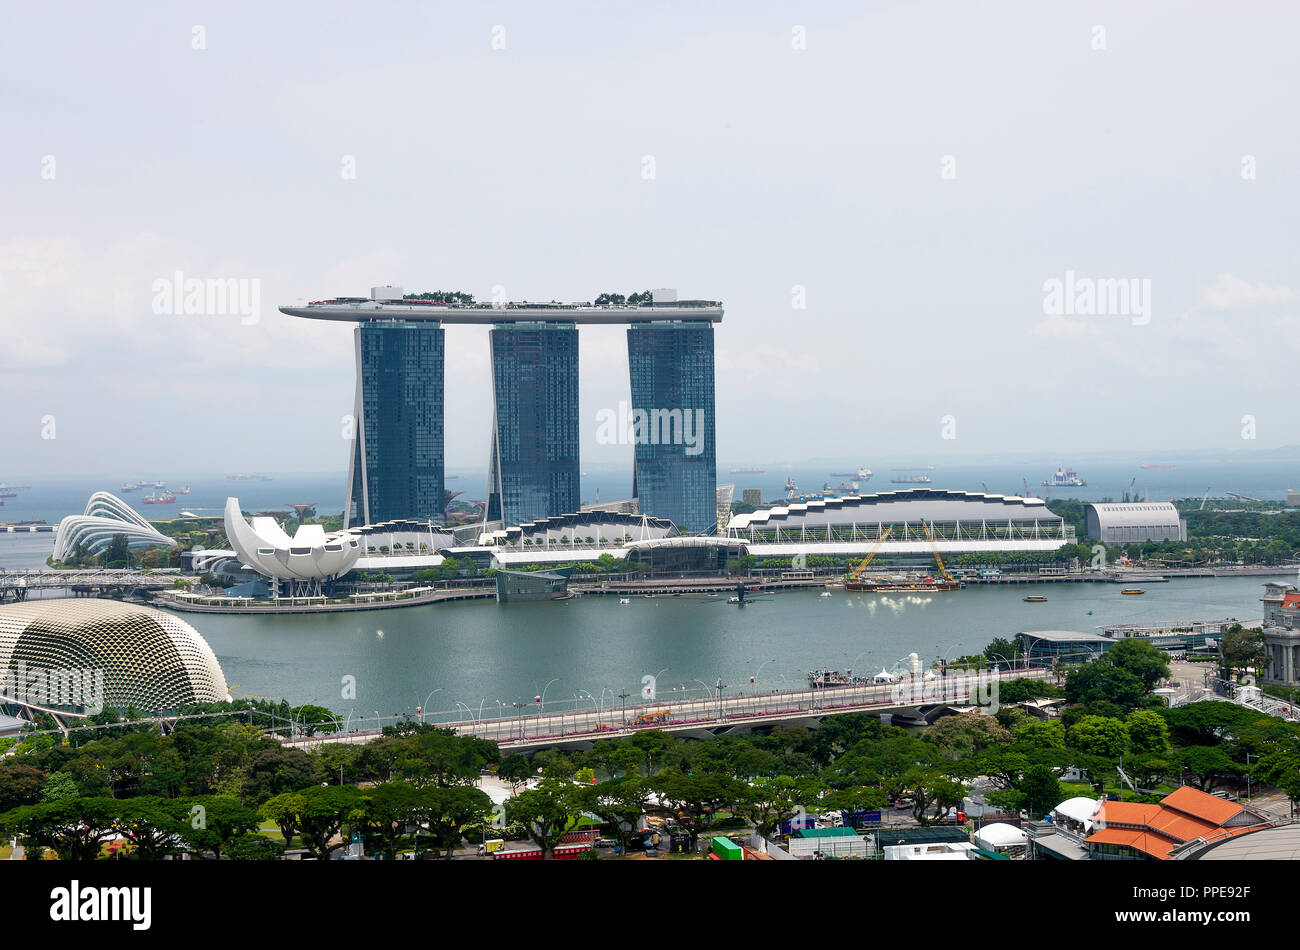 Aerial View of Marina Bay Sands Hotel, the Arts Science Museum, One of the Esplanade Theatres by the Bay and Gardens by the Bay Singapore Asia Stock Photo